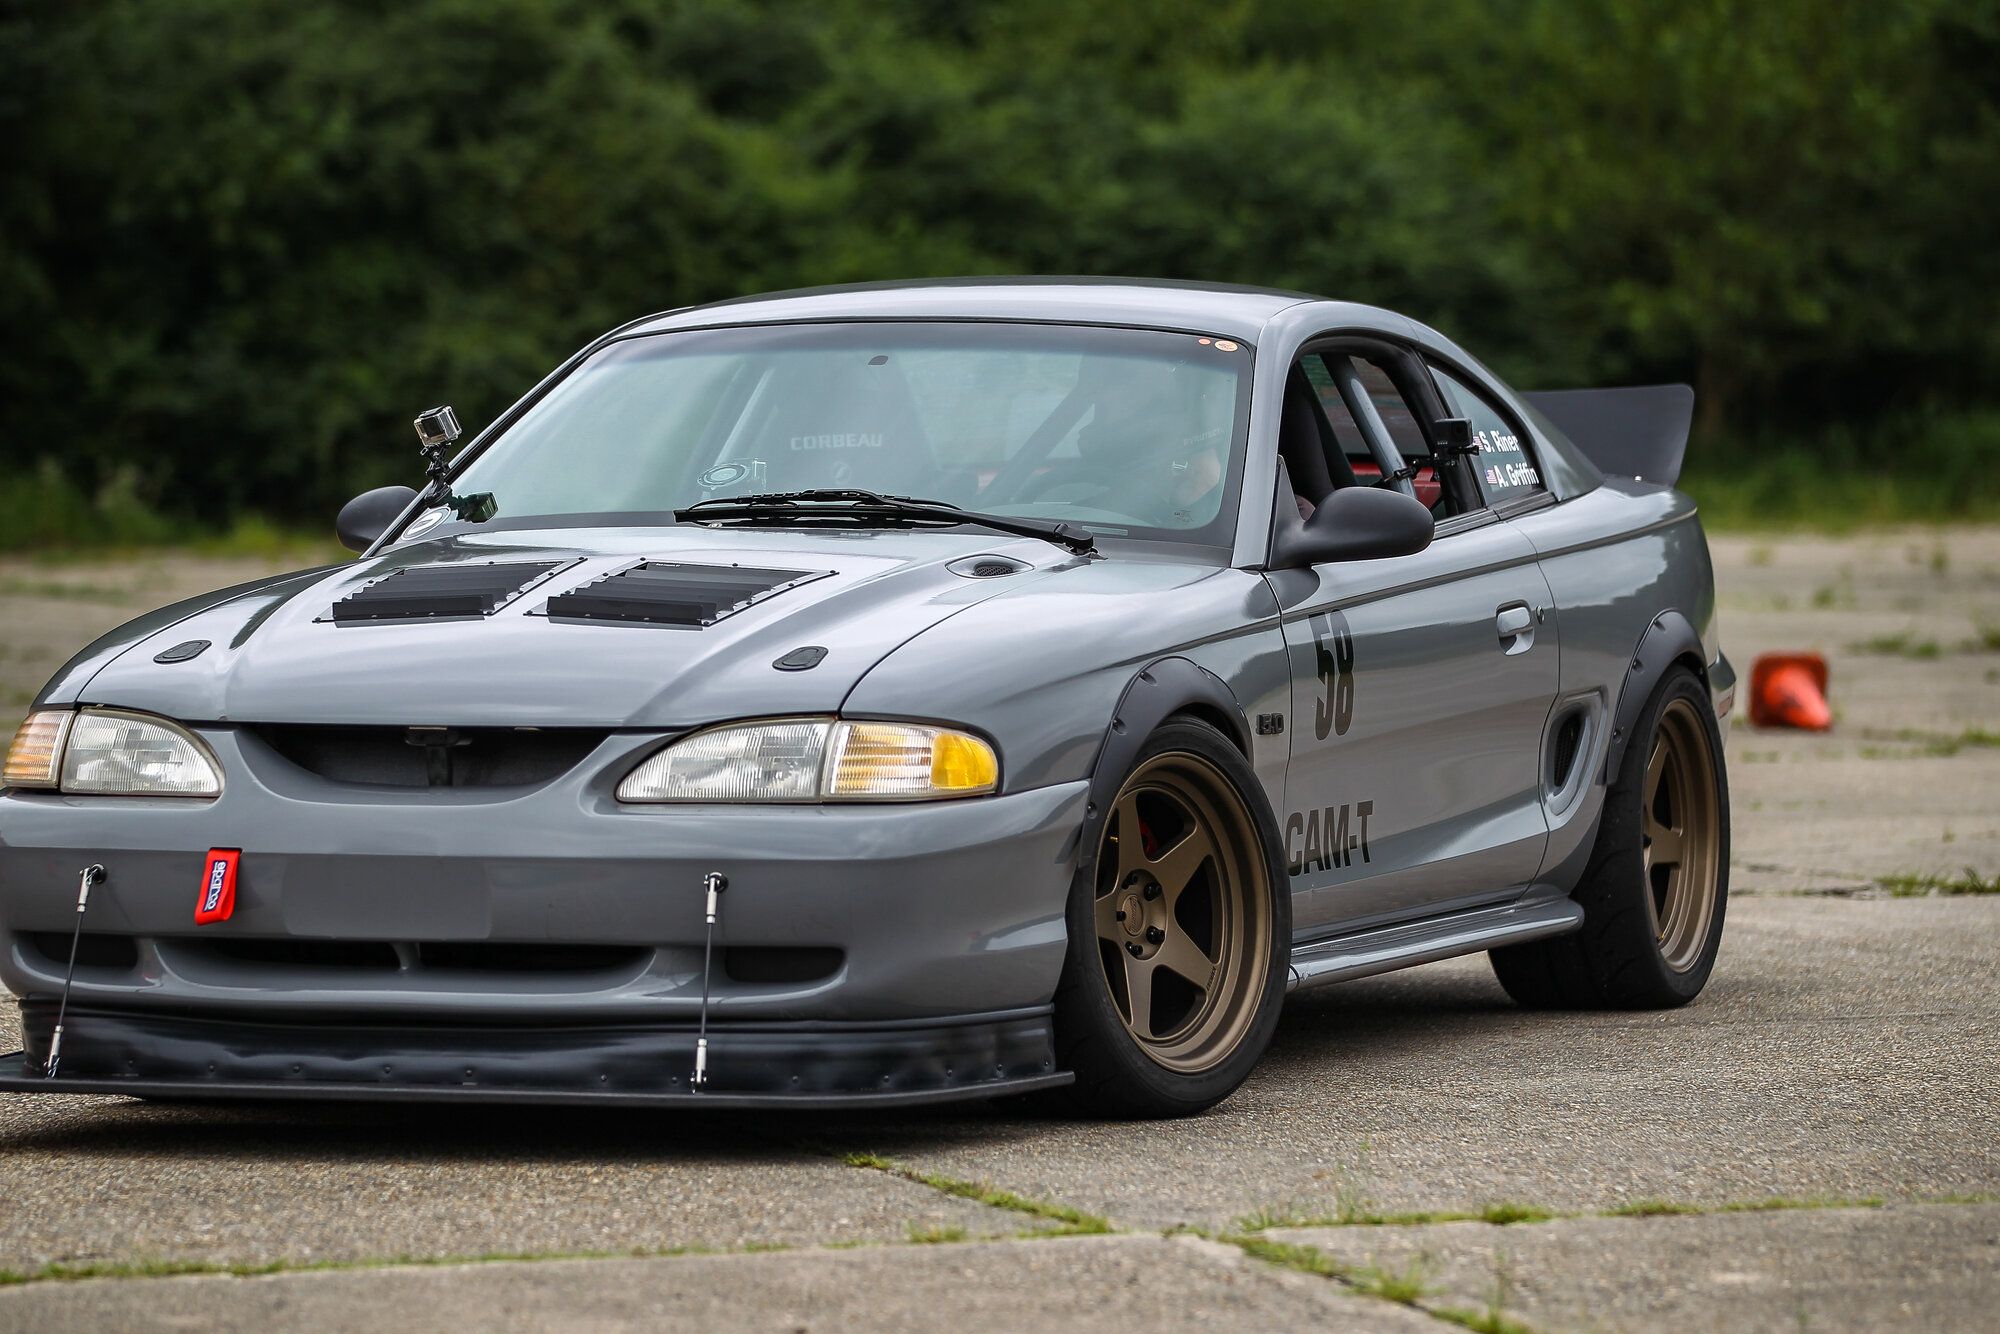 1994 Mustang
AutoX -  (RinerAutomotive's CAM-T Mustang)